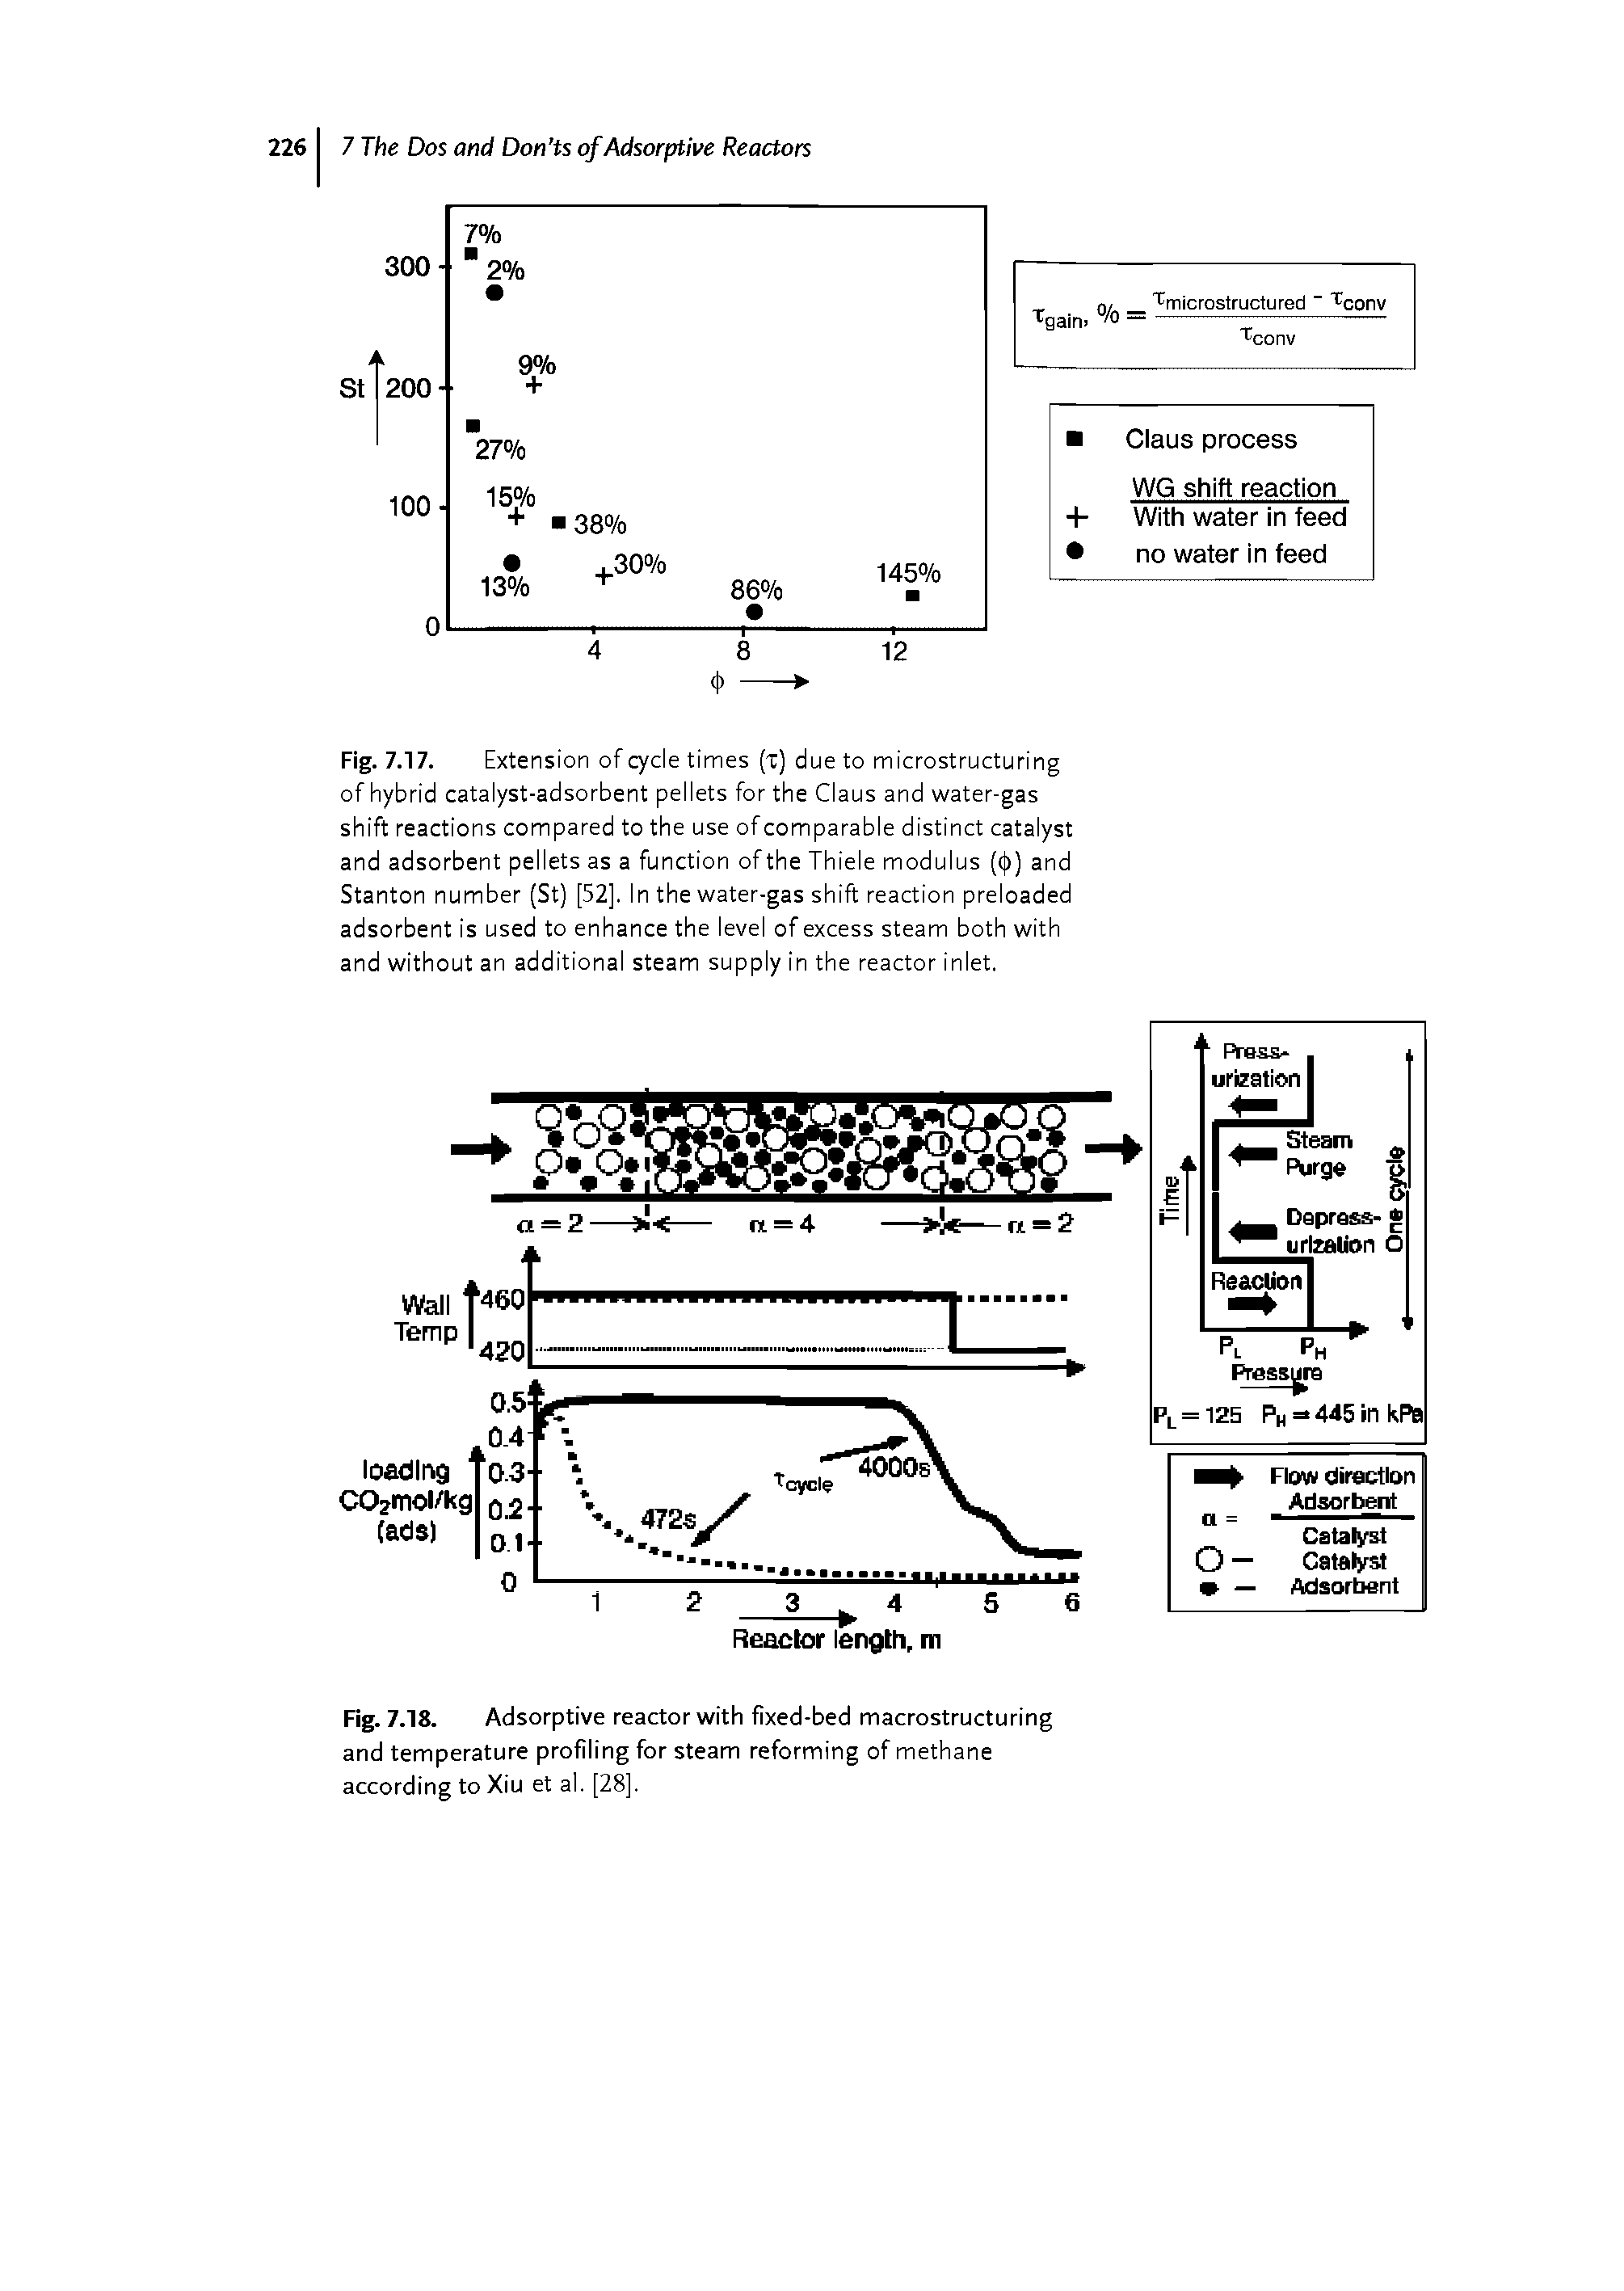 Fig. 7.17. Extension of cycle times [t) due to microstructuring of hybrid catalyst-adsorbent pellets for the Claus and water-gas shift reactions compared to the use of comparable distinct catalyst and adsorbent pellets as a function of the Thiele modulus (< )) and Stanton number (St) [52]. In the water-gas shift reaction preloaded adsorbent is used to enhance the level of excess steam both with and without an additional steam supply in the reactor inlet.